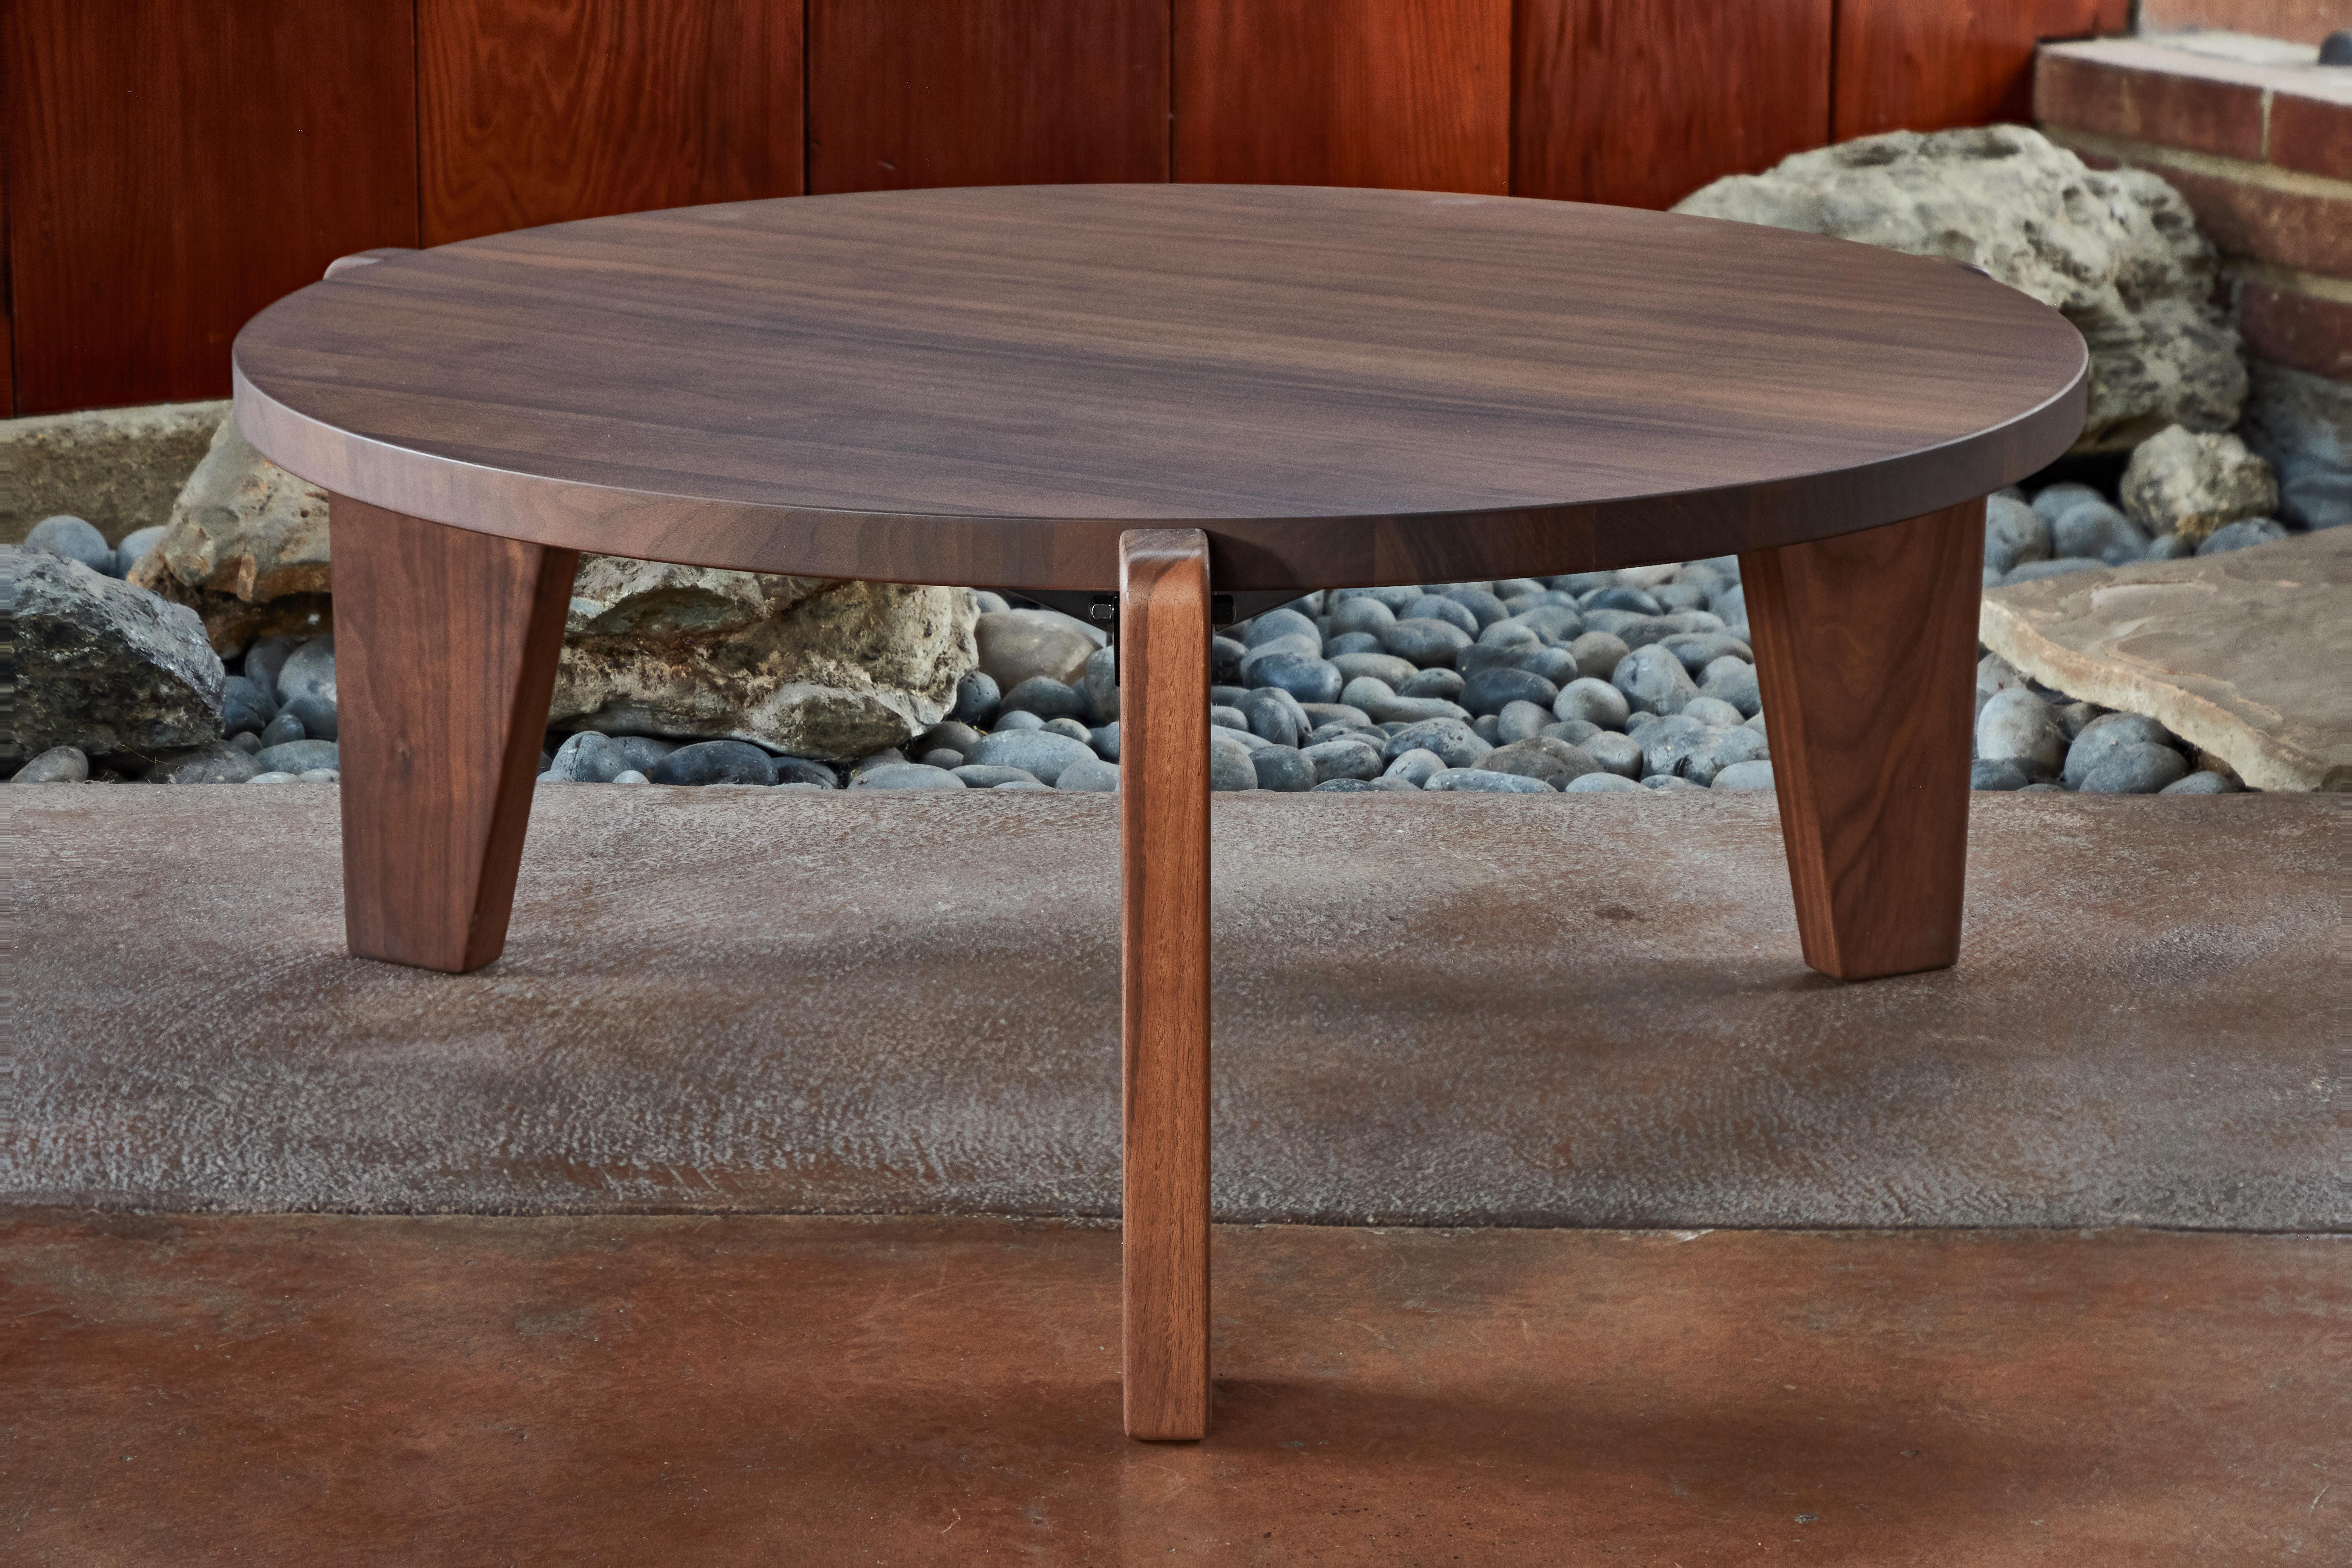 Jean Prouvé guéridon bas coffee table in walnut for Vitra. In like new condition. Executed in solid American walnut.

Jean Prouvé guéridon bas coffee table in walnut for Vitra. Designed in 1944, the guéridon bas is an early masterpiece by the